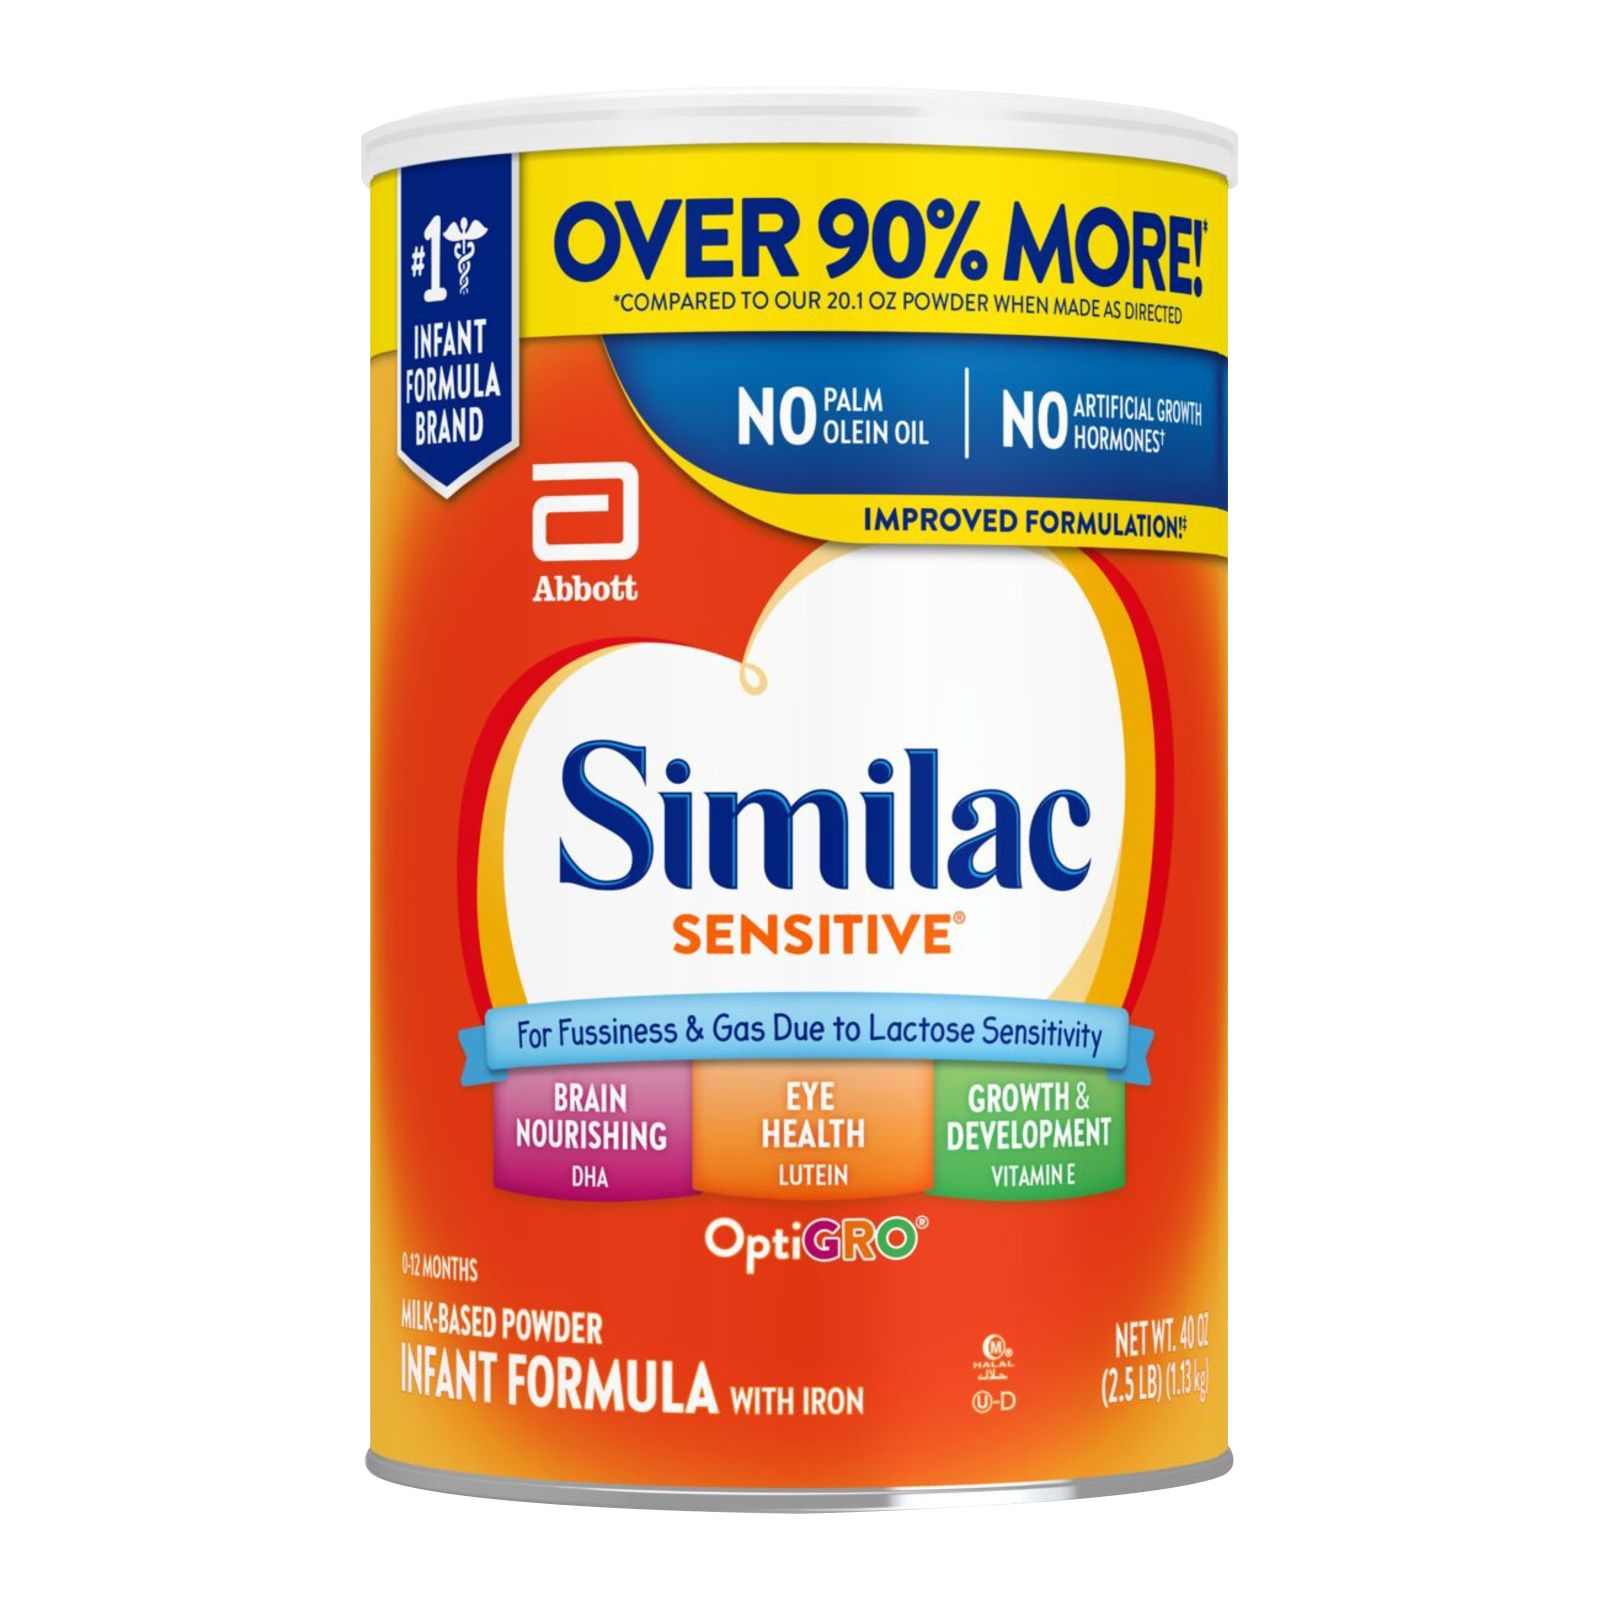 different types of similac